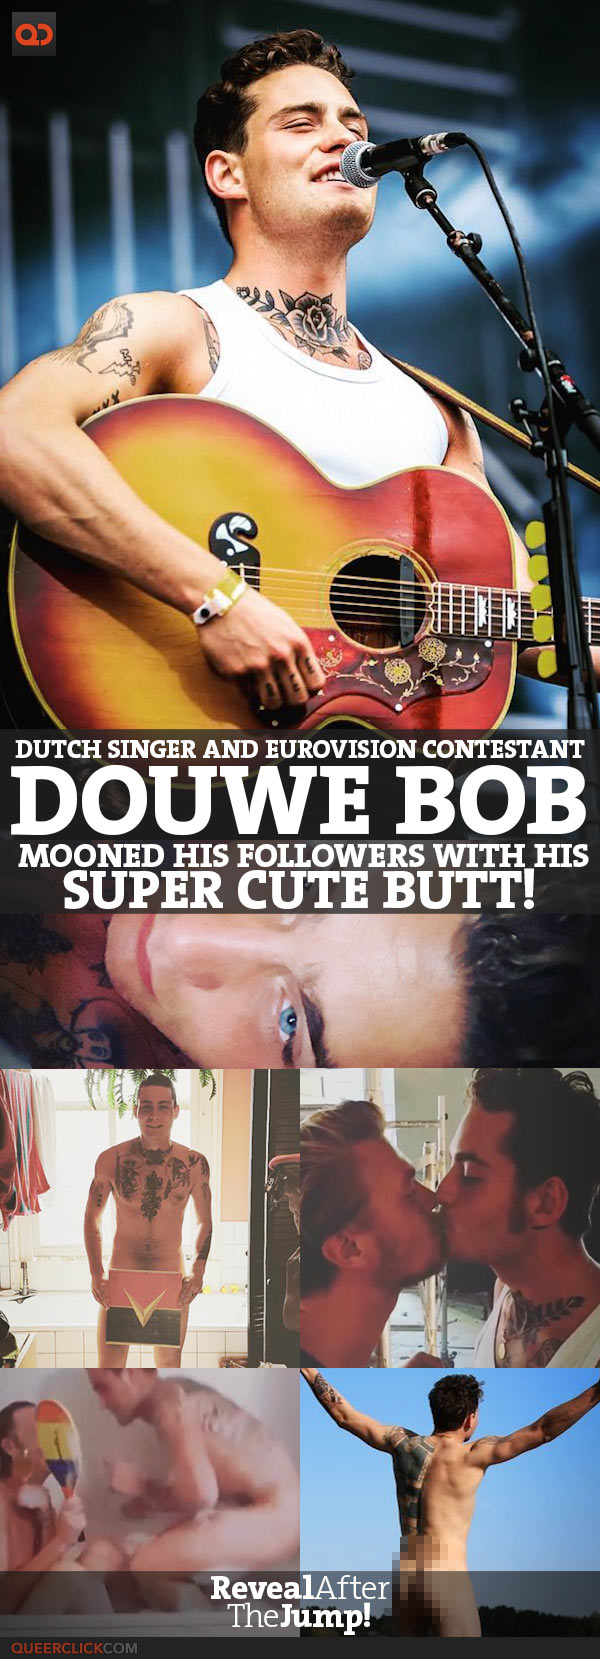 Douwe Bob, Dutch Singer And Eurovision Contestant, Mooned His Followers With His Super Cute Butt!